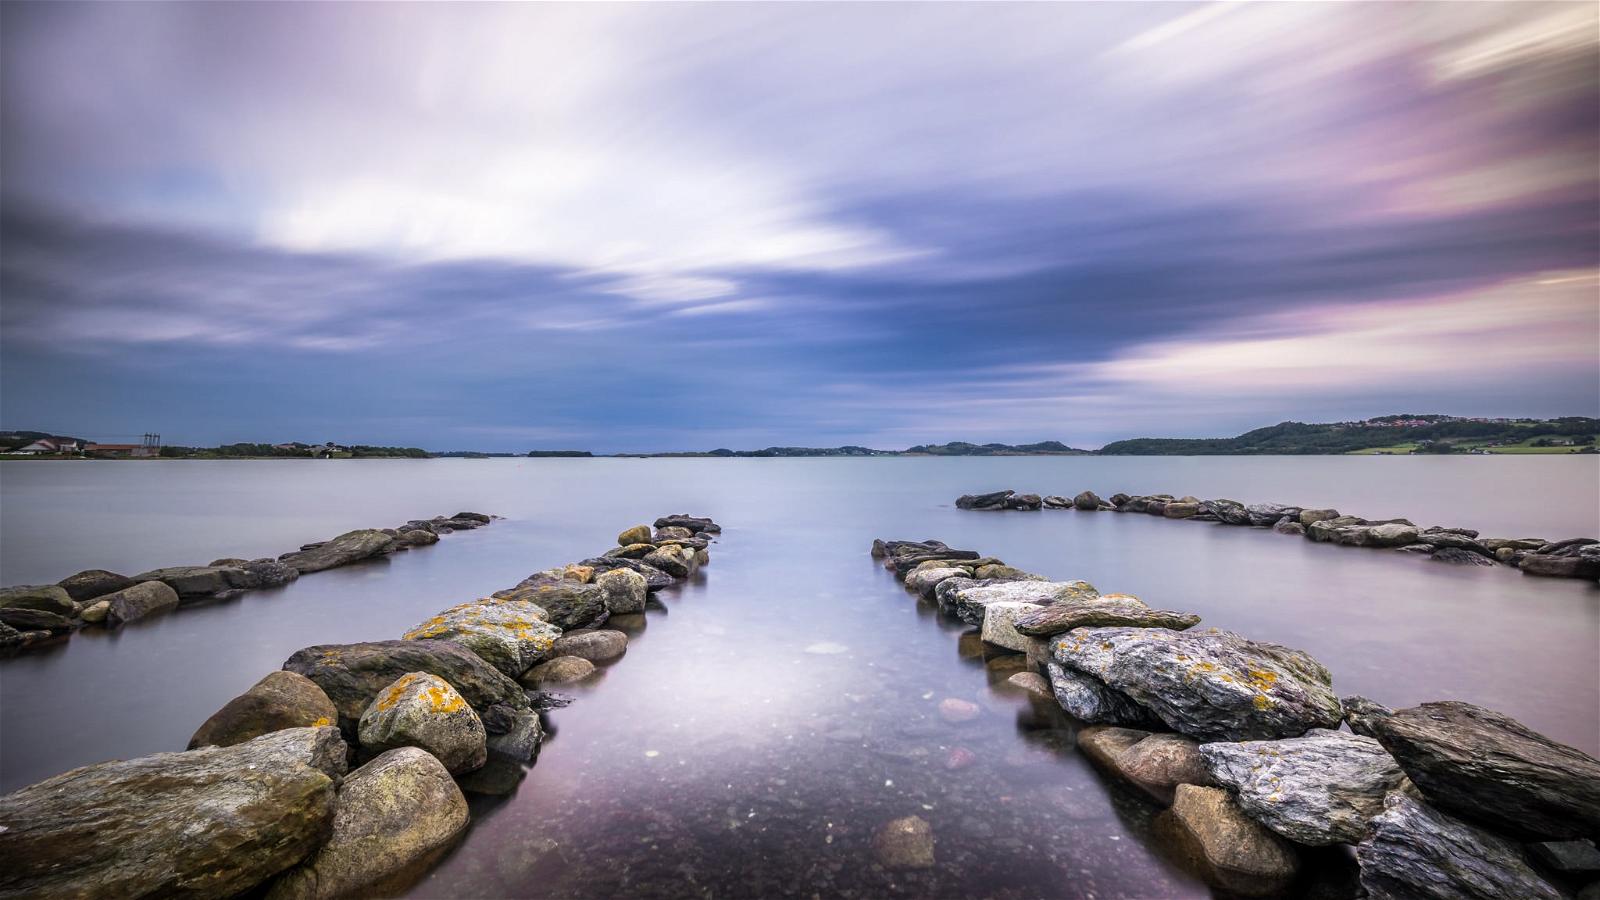 Hafrsfjord की छवि. longexposure travel sunset sea sky seascape motion water weather norway clouds reflections landscape geotagged photography stavanger photo hafrsfjord rocks europe no sony fjord fullframe onsale ultrawide a7 rogaland bythesea sonya7 sonyfe1635